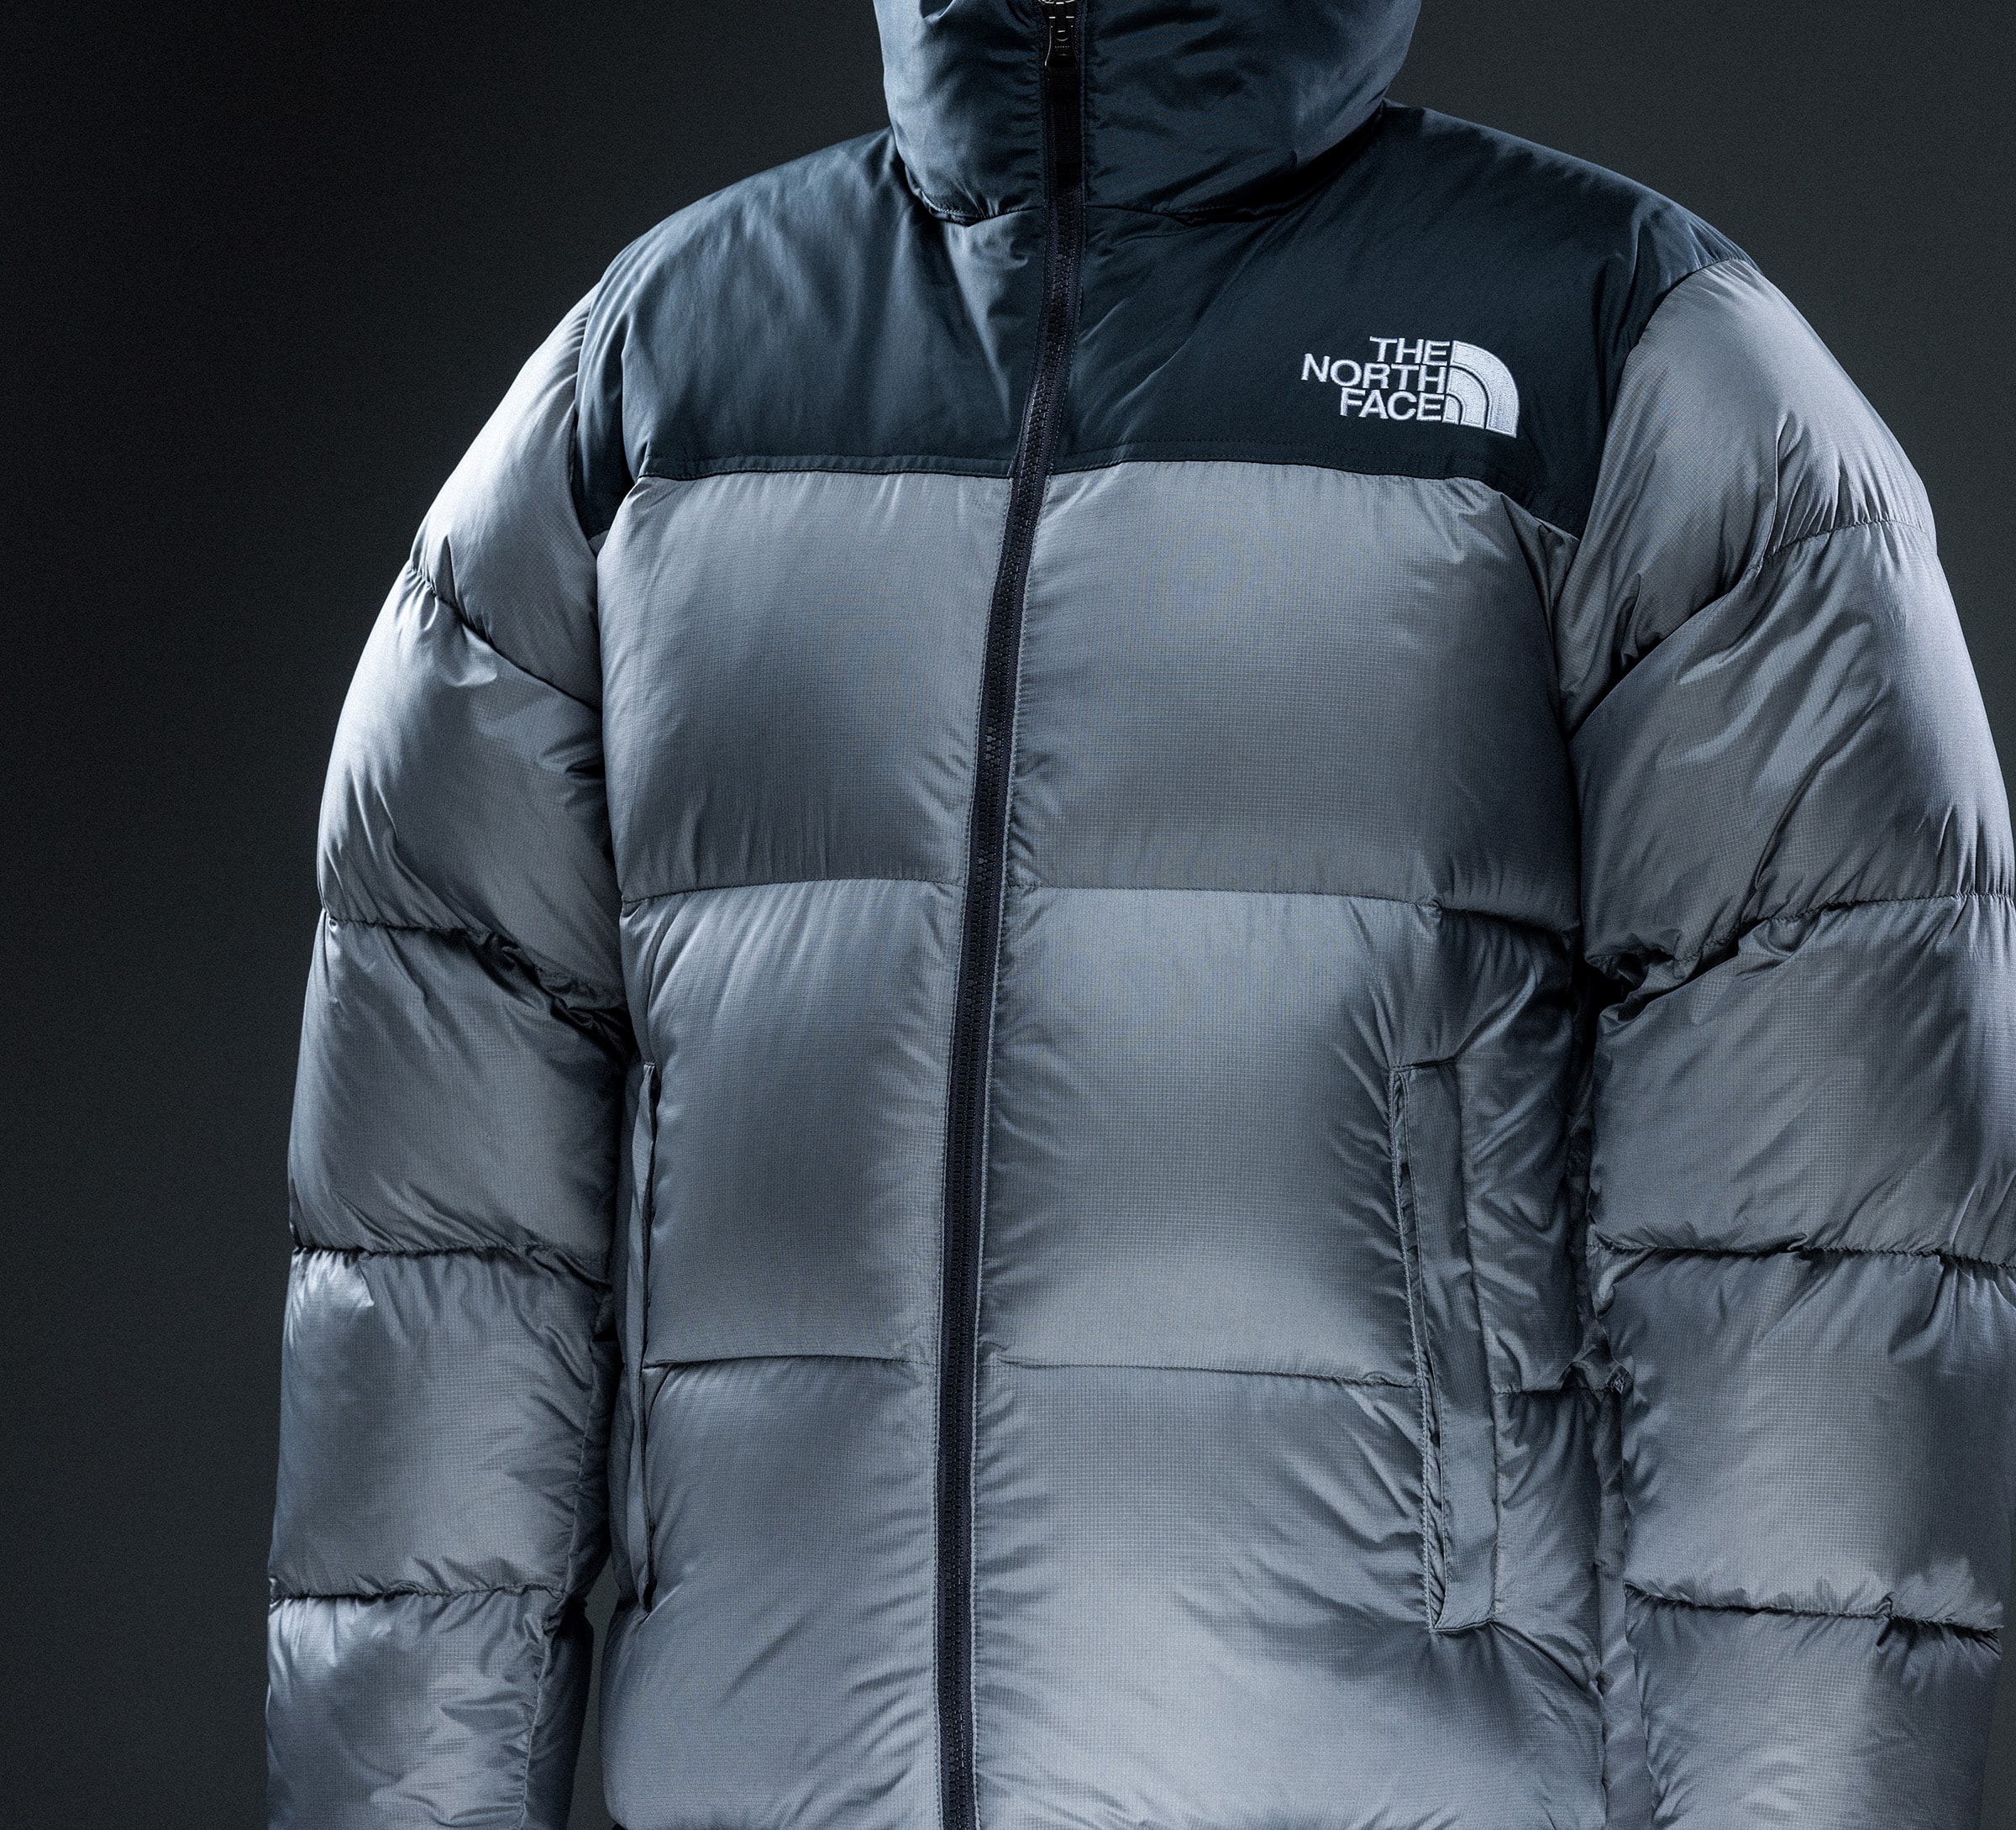 30 YEARS OF NUPTSE JACKET｜THE NORTH FACE